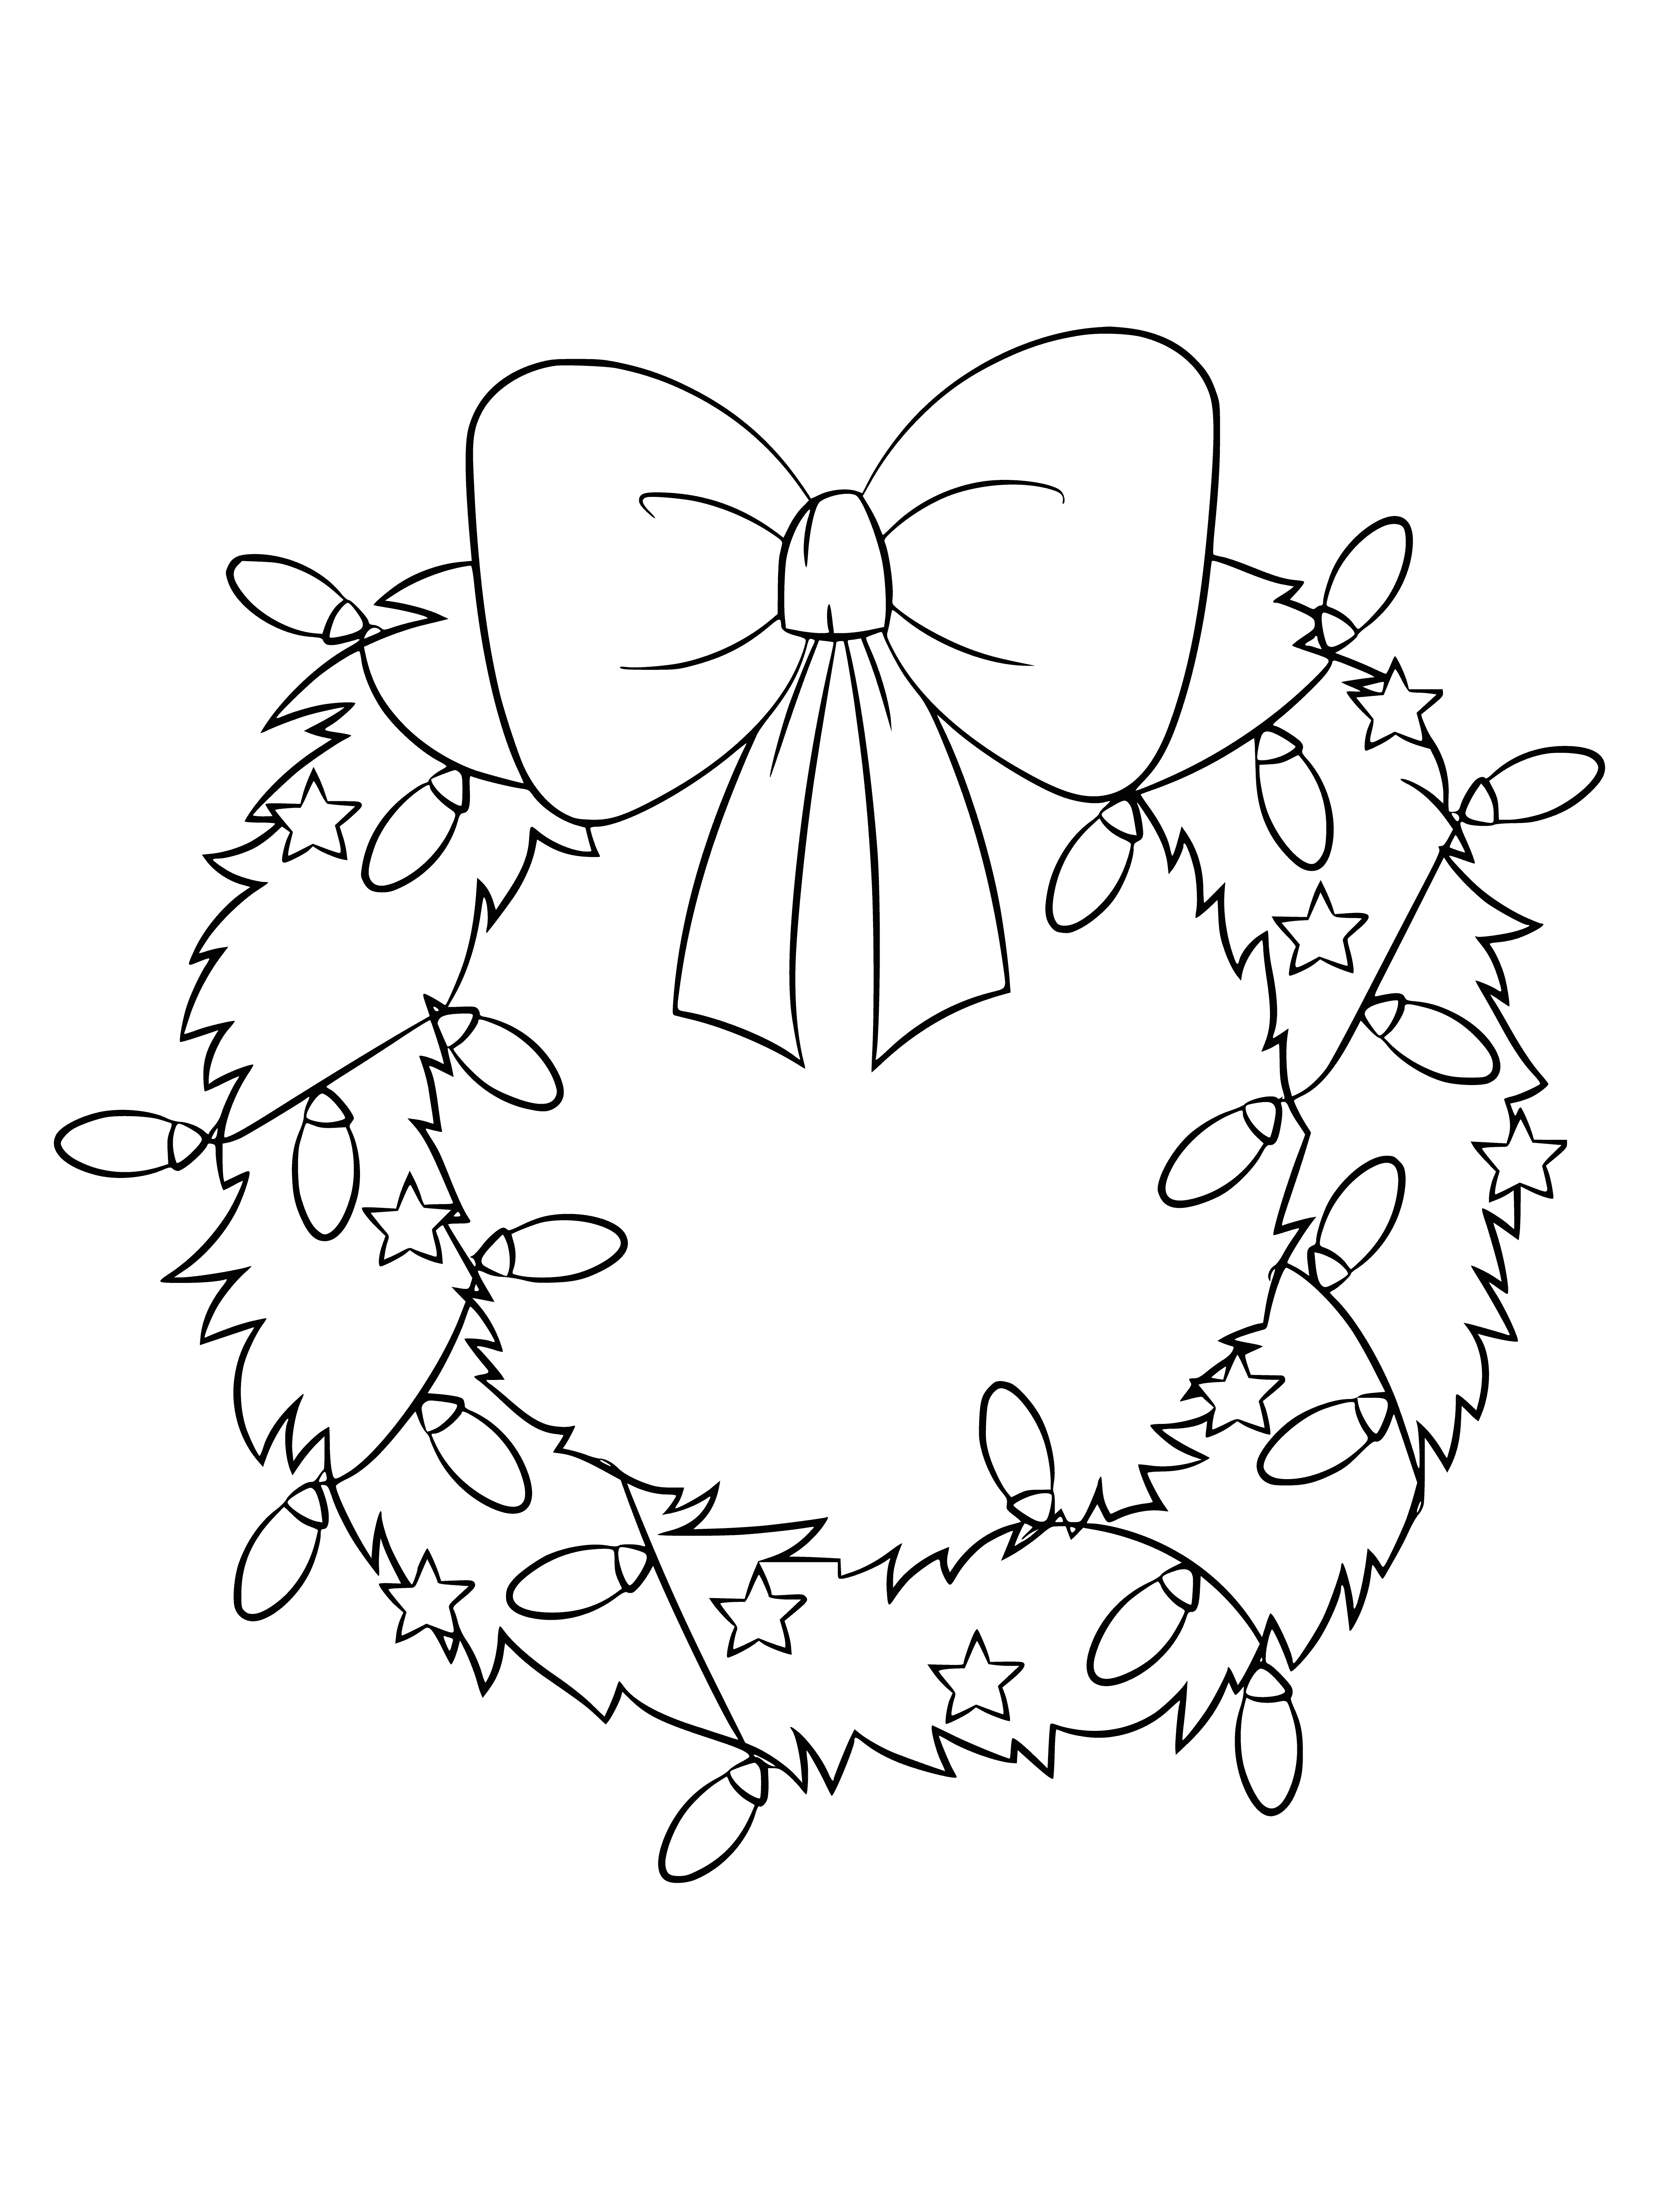 coloring page: Decorative New Year's wreath of green leaves & branches, with red berries, ribbons & pinecones, hung on door/wall - traditional holiday decoration.